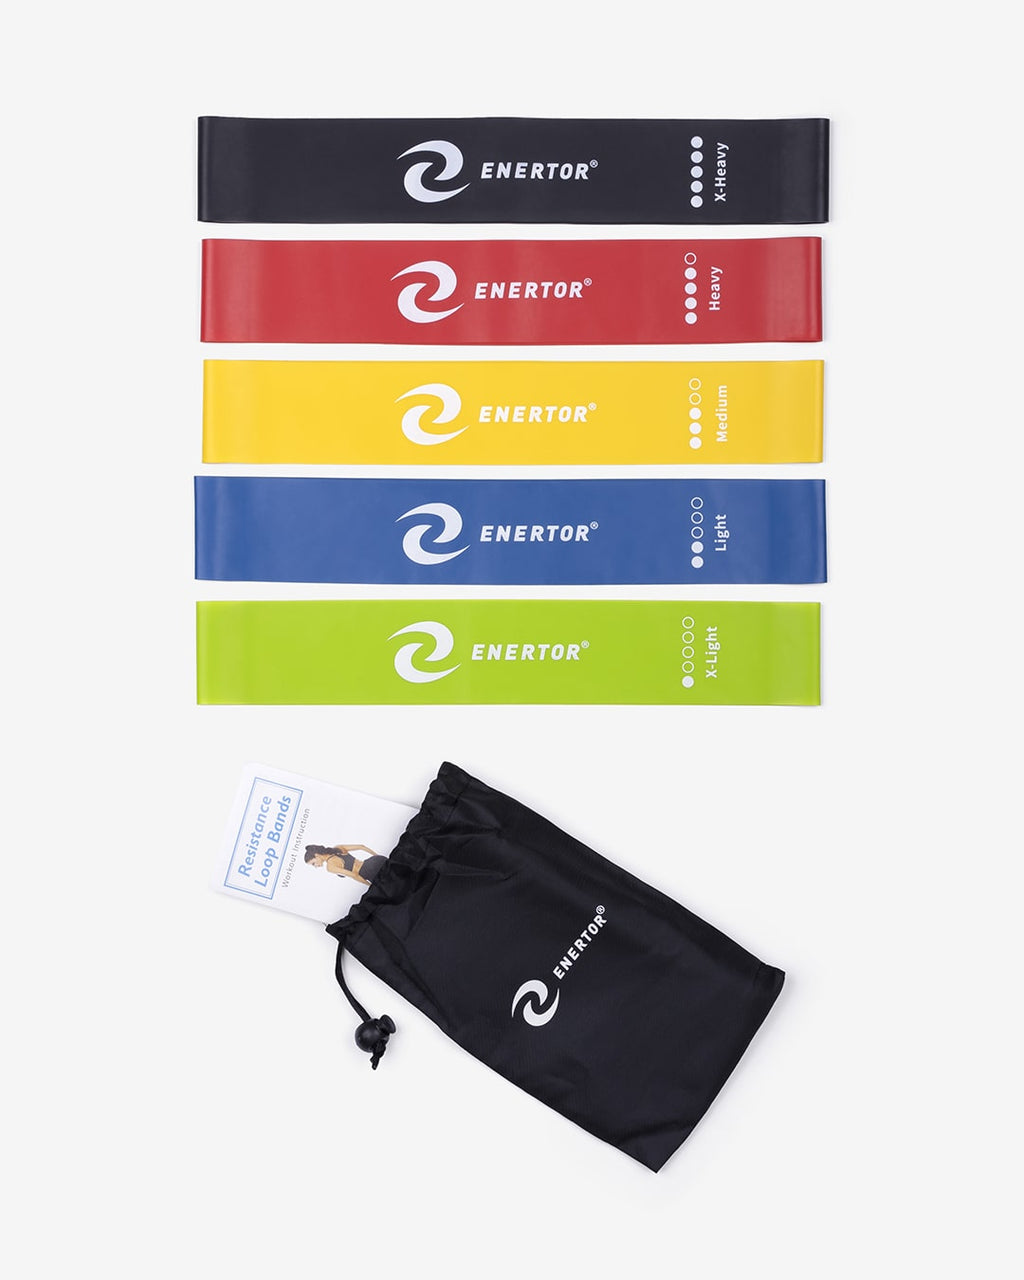 Enertor Exercise resistance bands - varying weights laid out in a stack